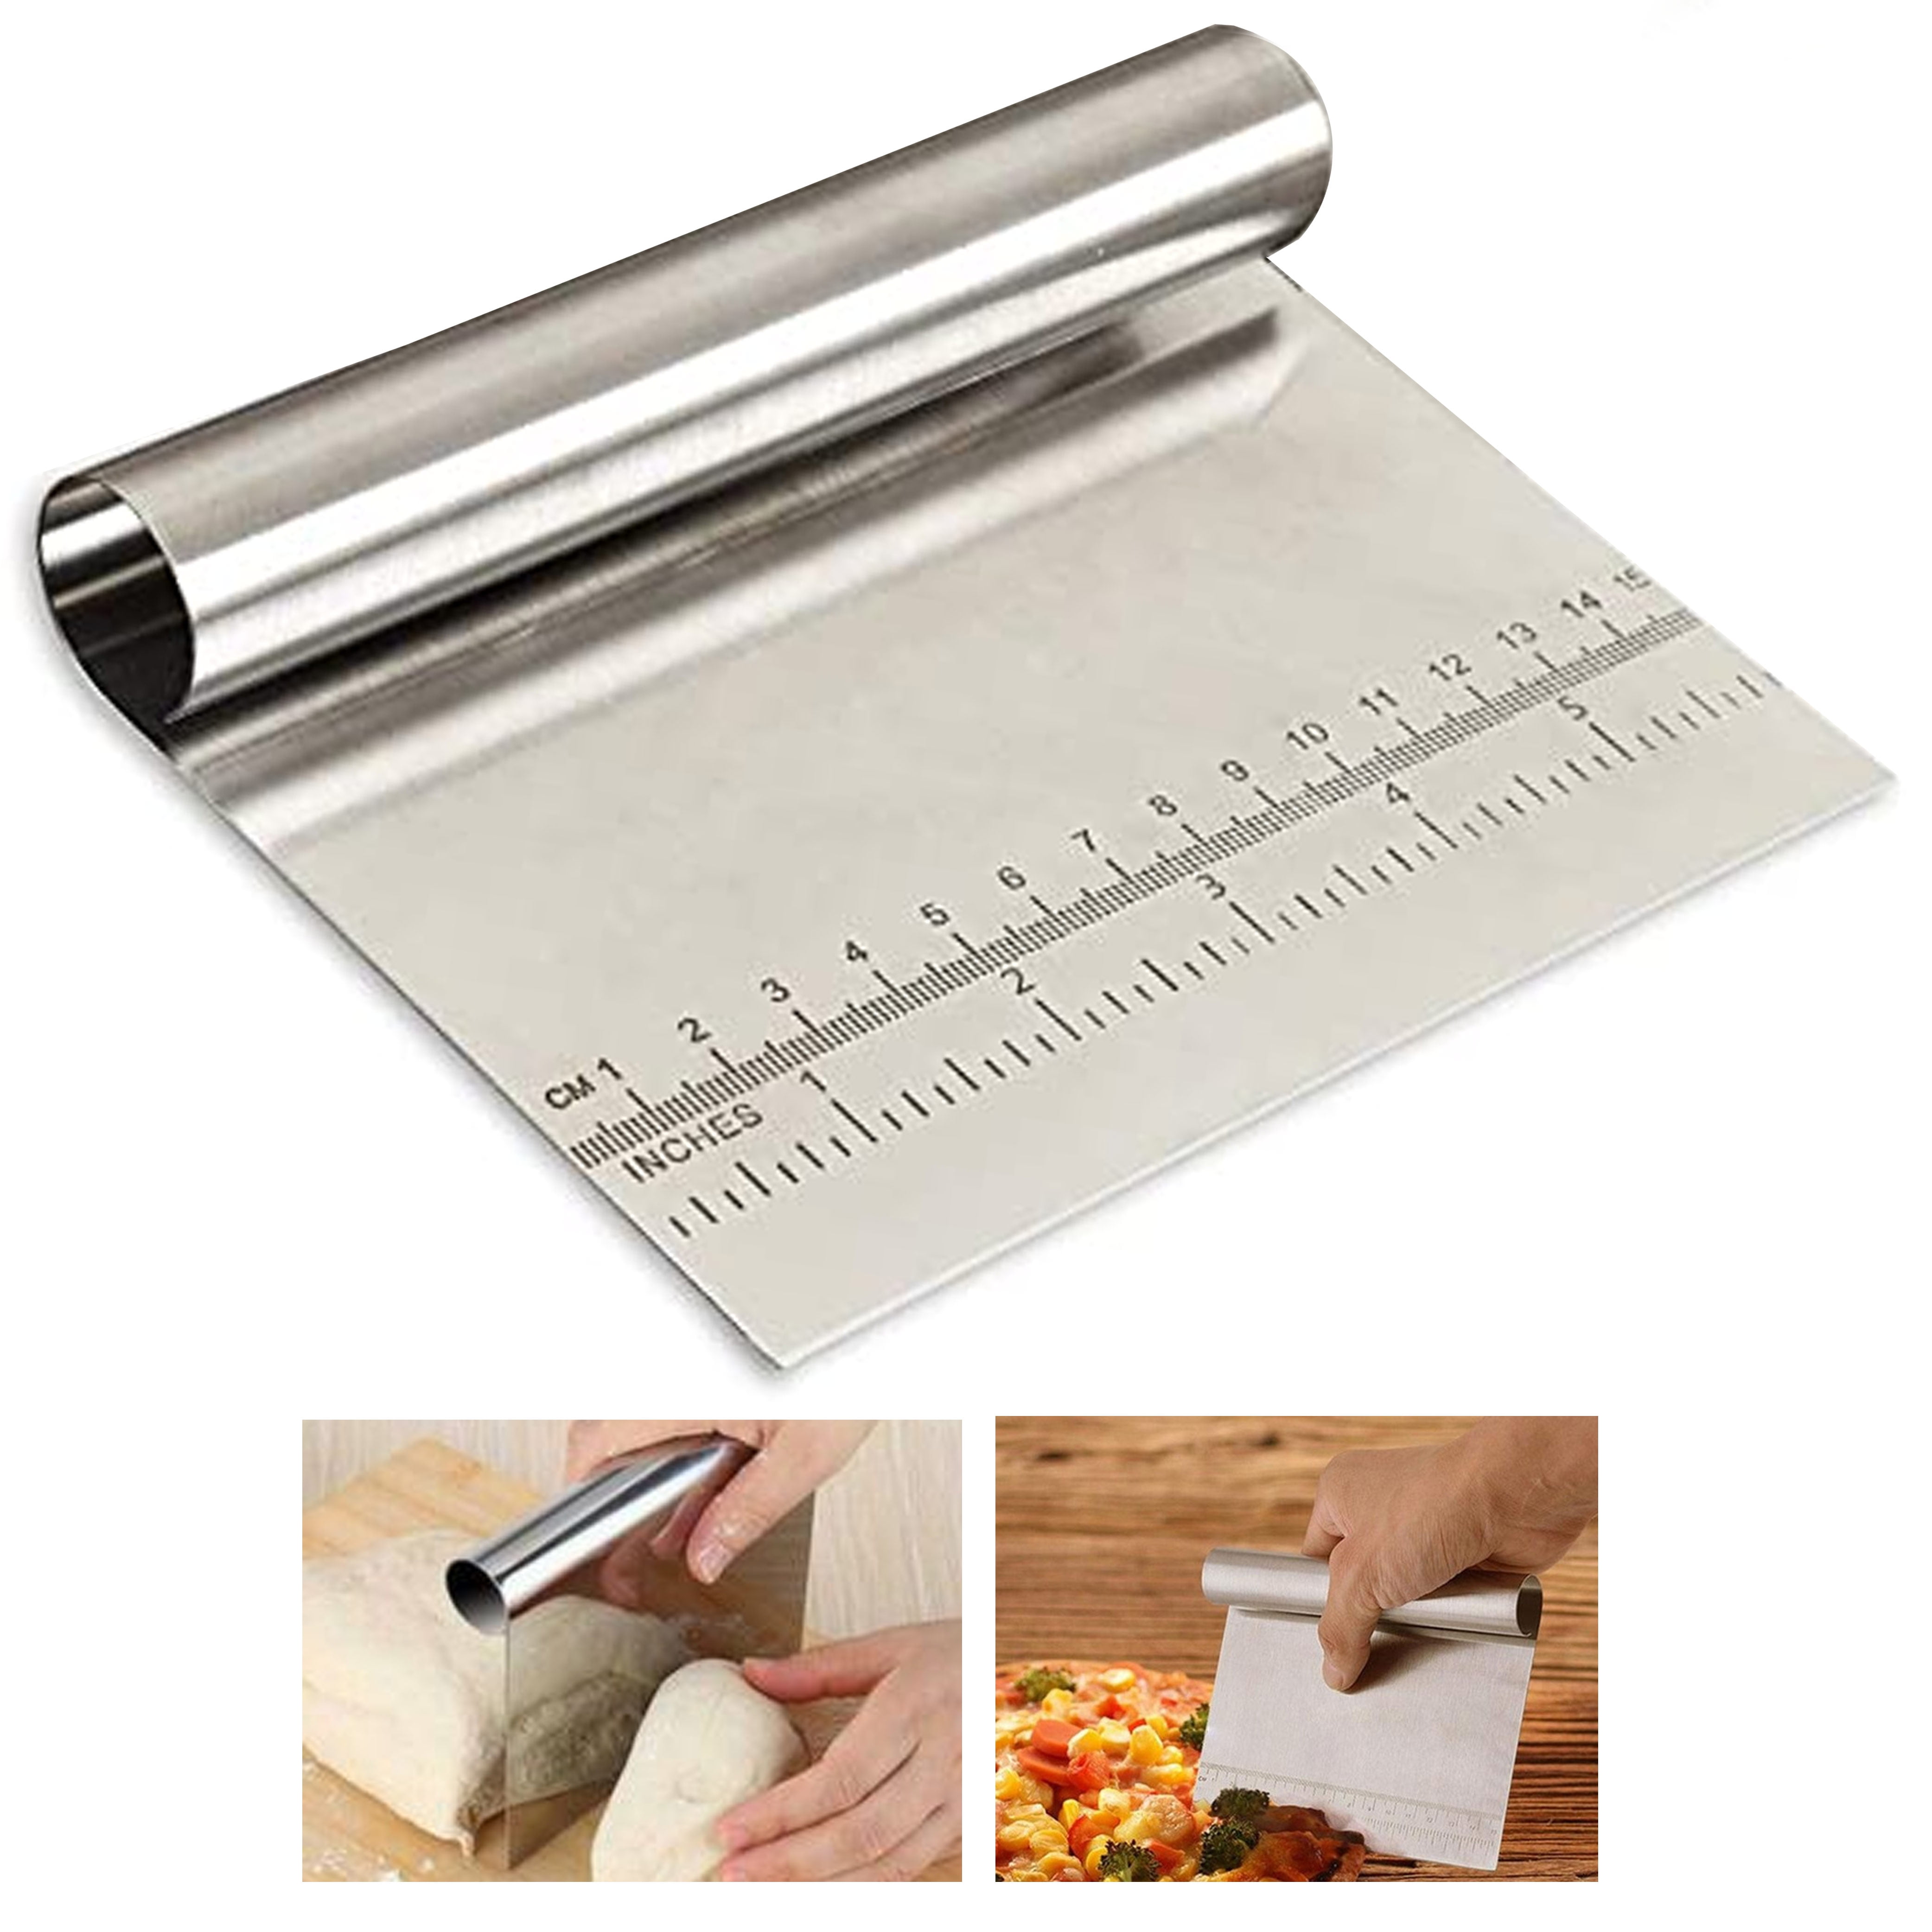 1X Stainless Steel Pizza Dough Scraper Cutter Kitchen Flour Pastry Cake ToolXDUK